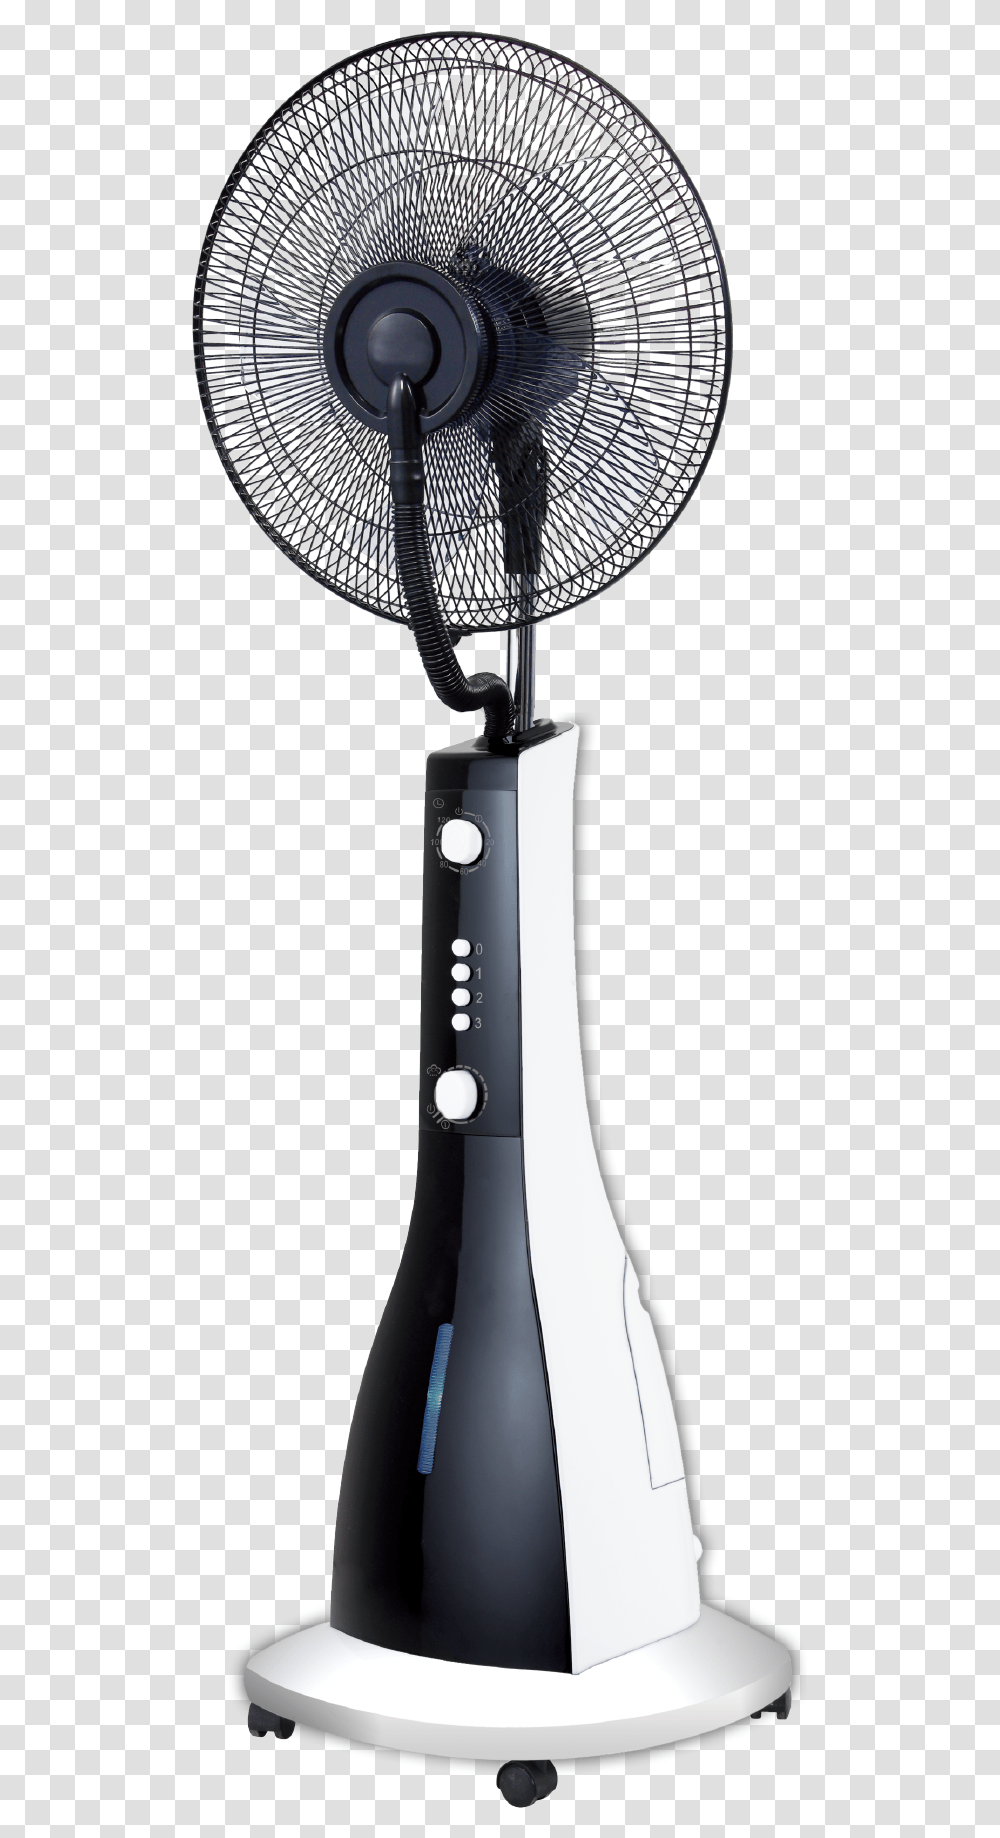 Ventilator Airco Water Spray, Lamp, Appliance, Clothes Iron, Lighter Transparent Png